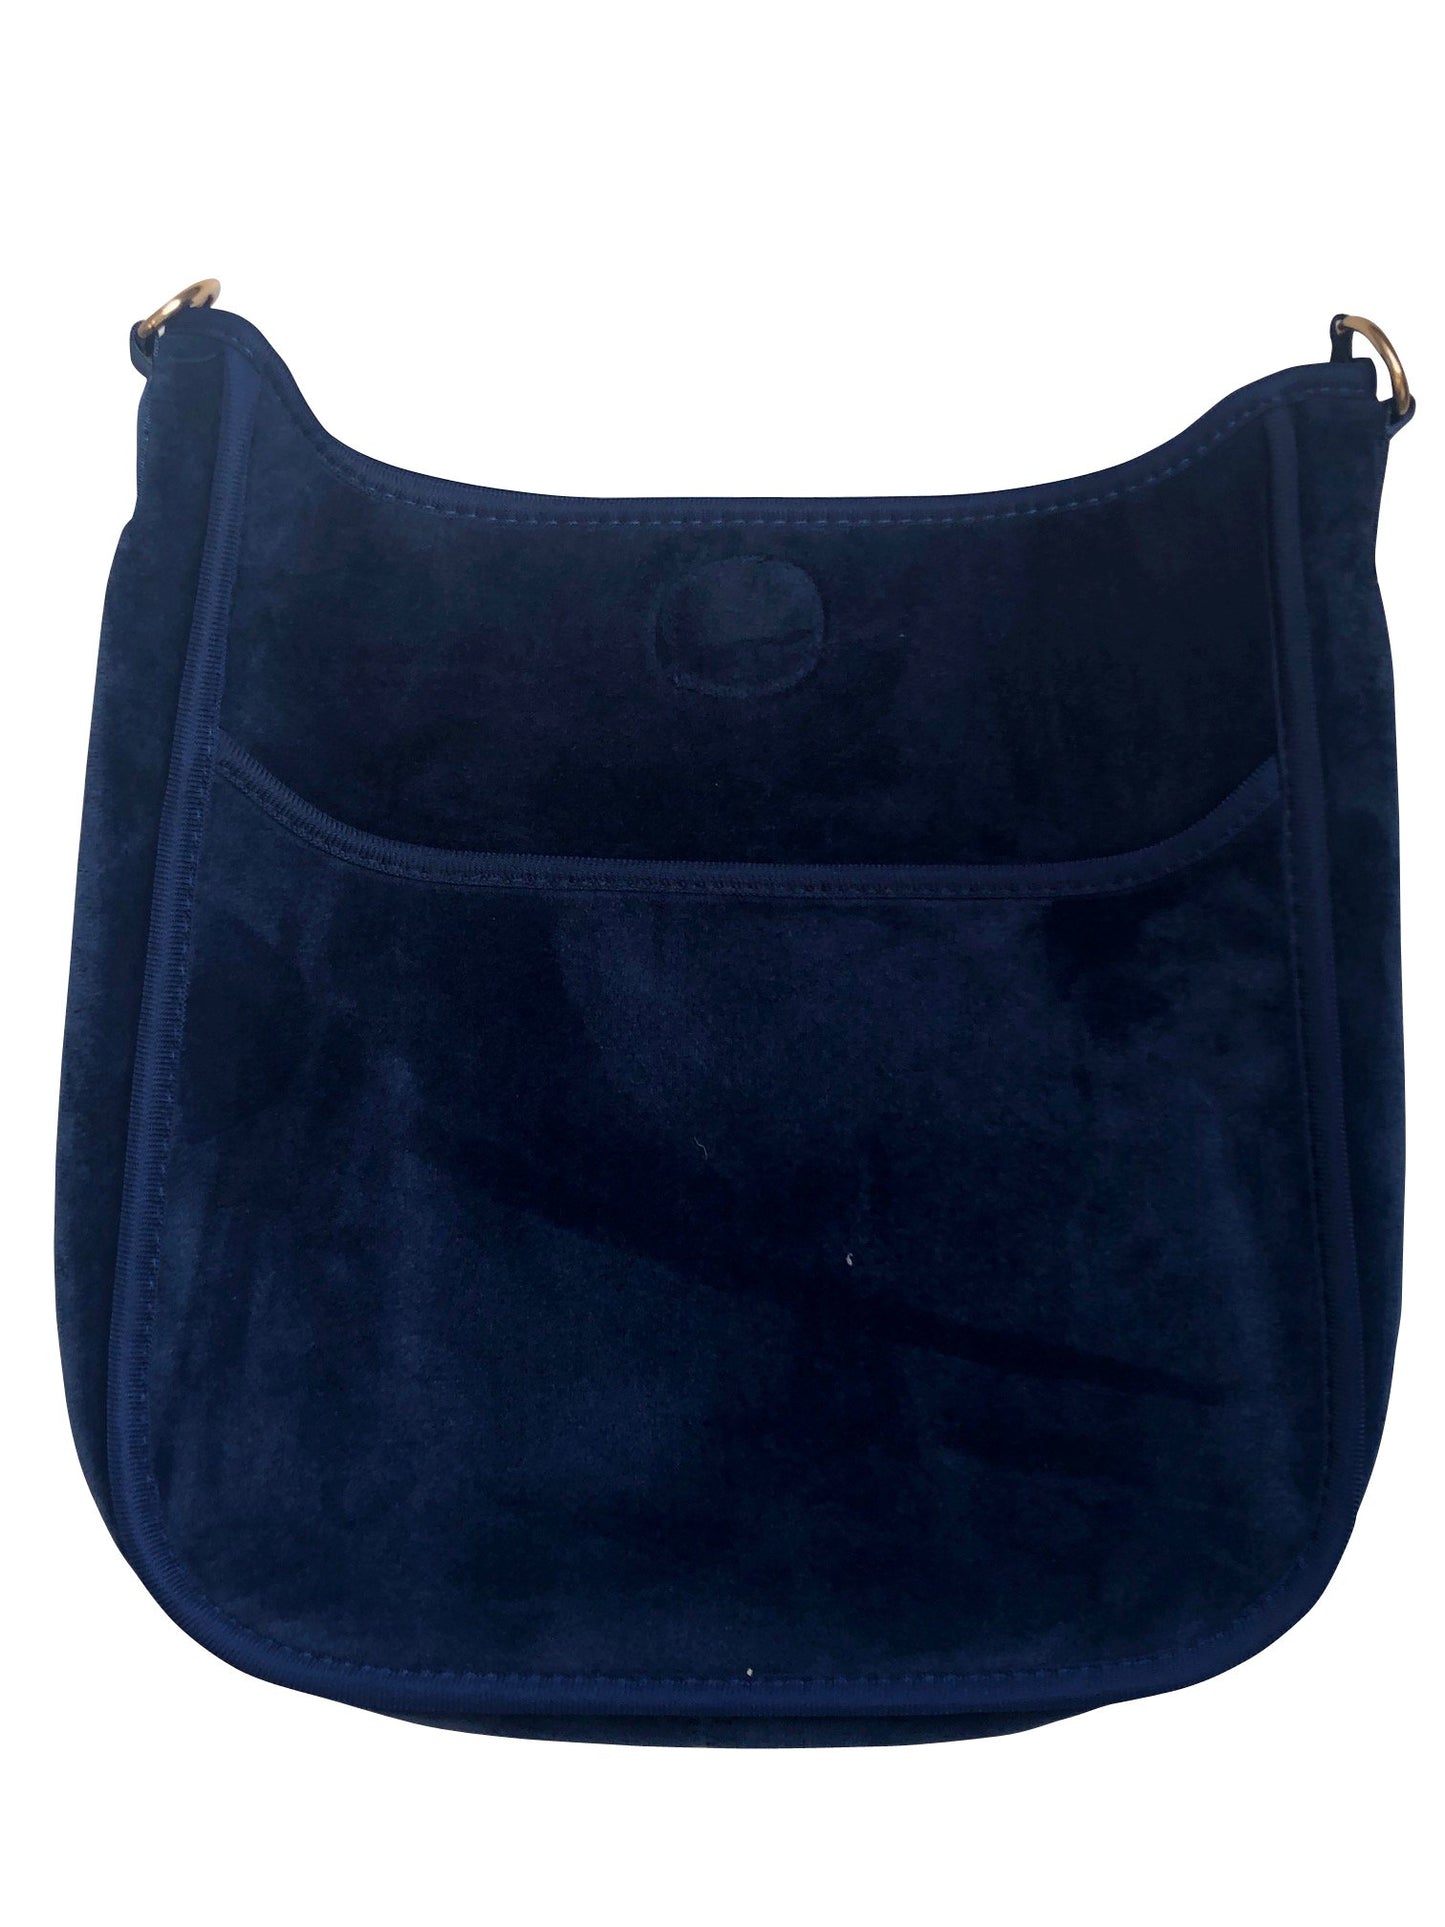 AHDORNED Velvet Messenger - Navy/Gold Hardware - NO STRAP ATTACHED - See Straps available at The Good Life Boutique